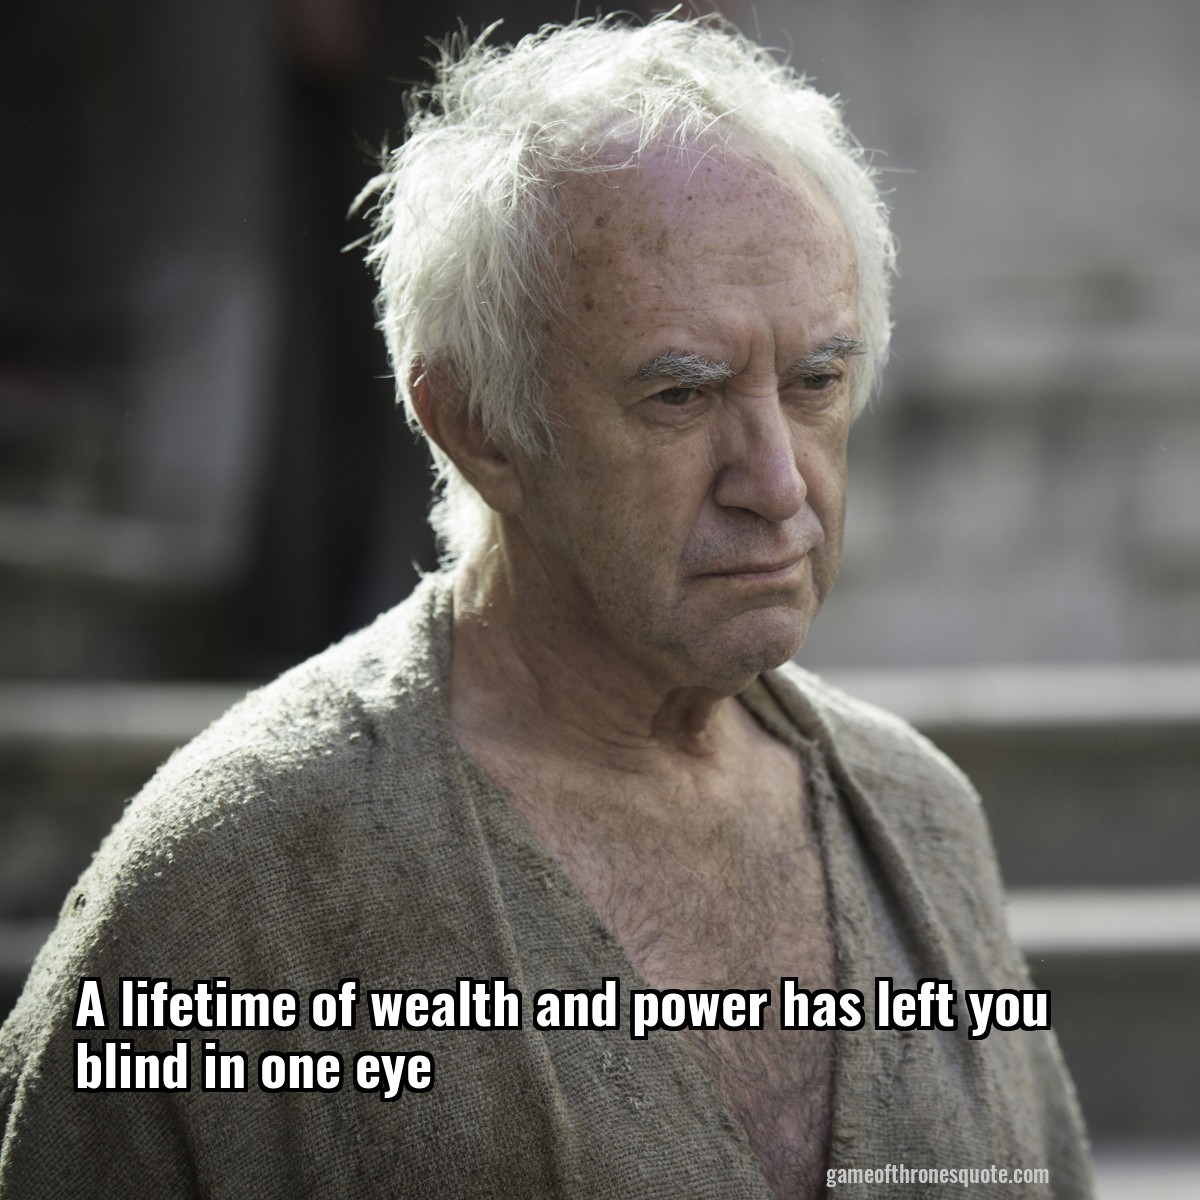 A lifetime of wealth and power has left you blind in one eye